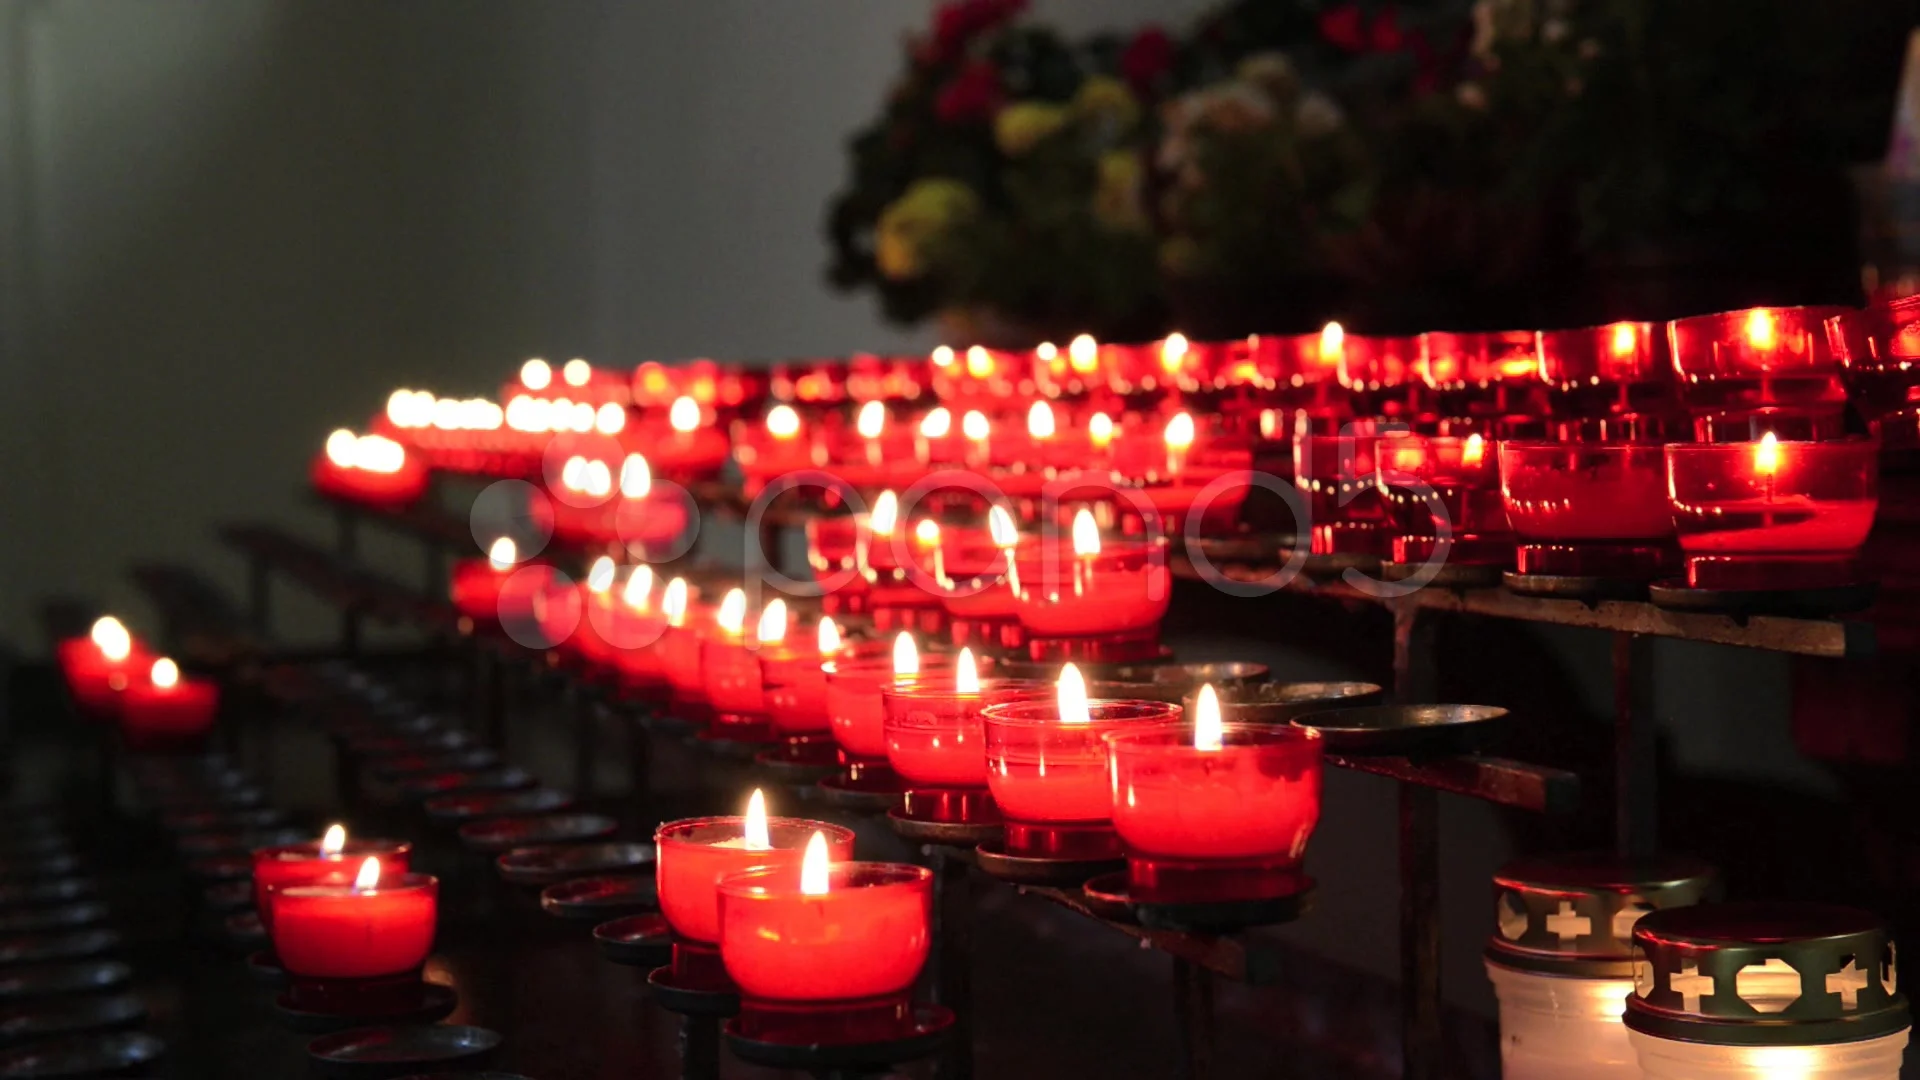 Lots of red church candles